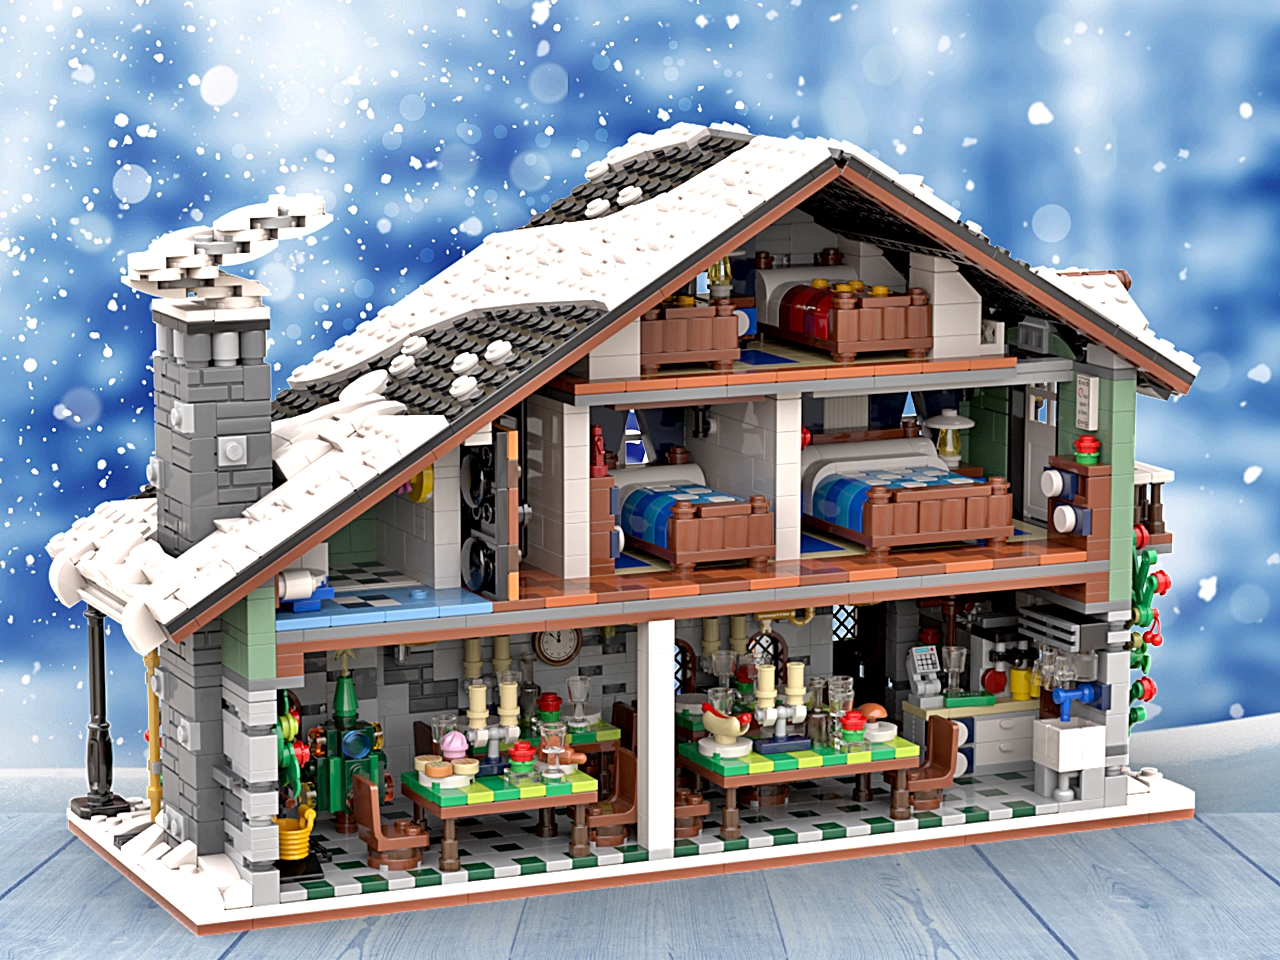 Winter Fish & Supply with Motorboat and Ice Fishing Shed] [BrickLink]